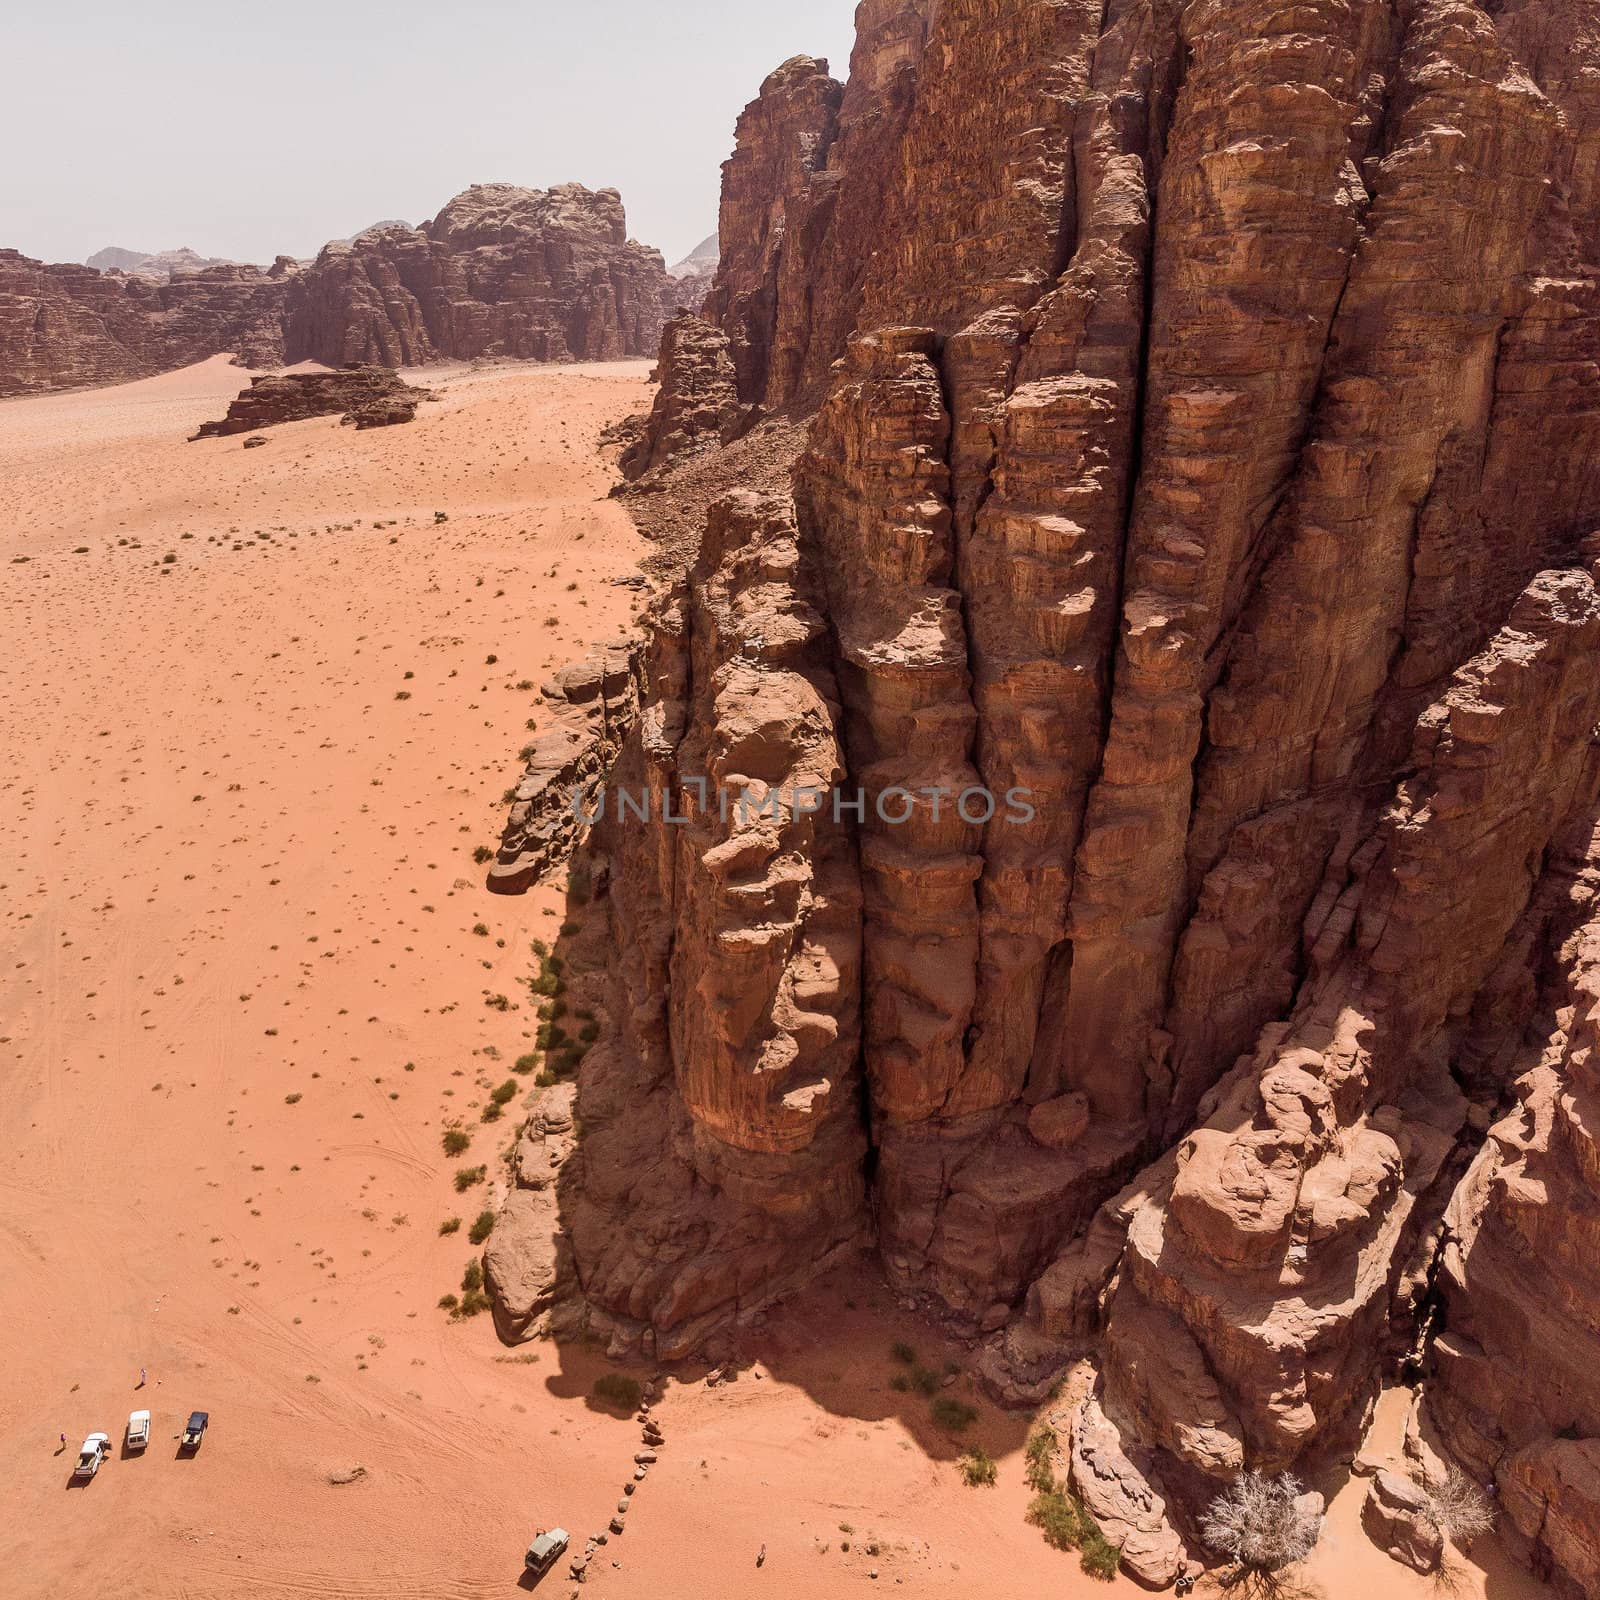 Aerial view, taken with the drone, of rock formations and monolithic mountains in the desert of Wadi Rum, Jordan by geogif